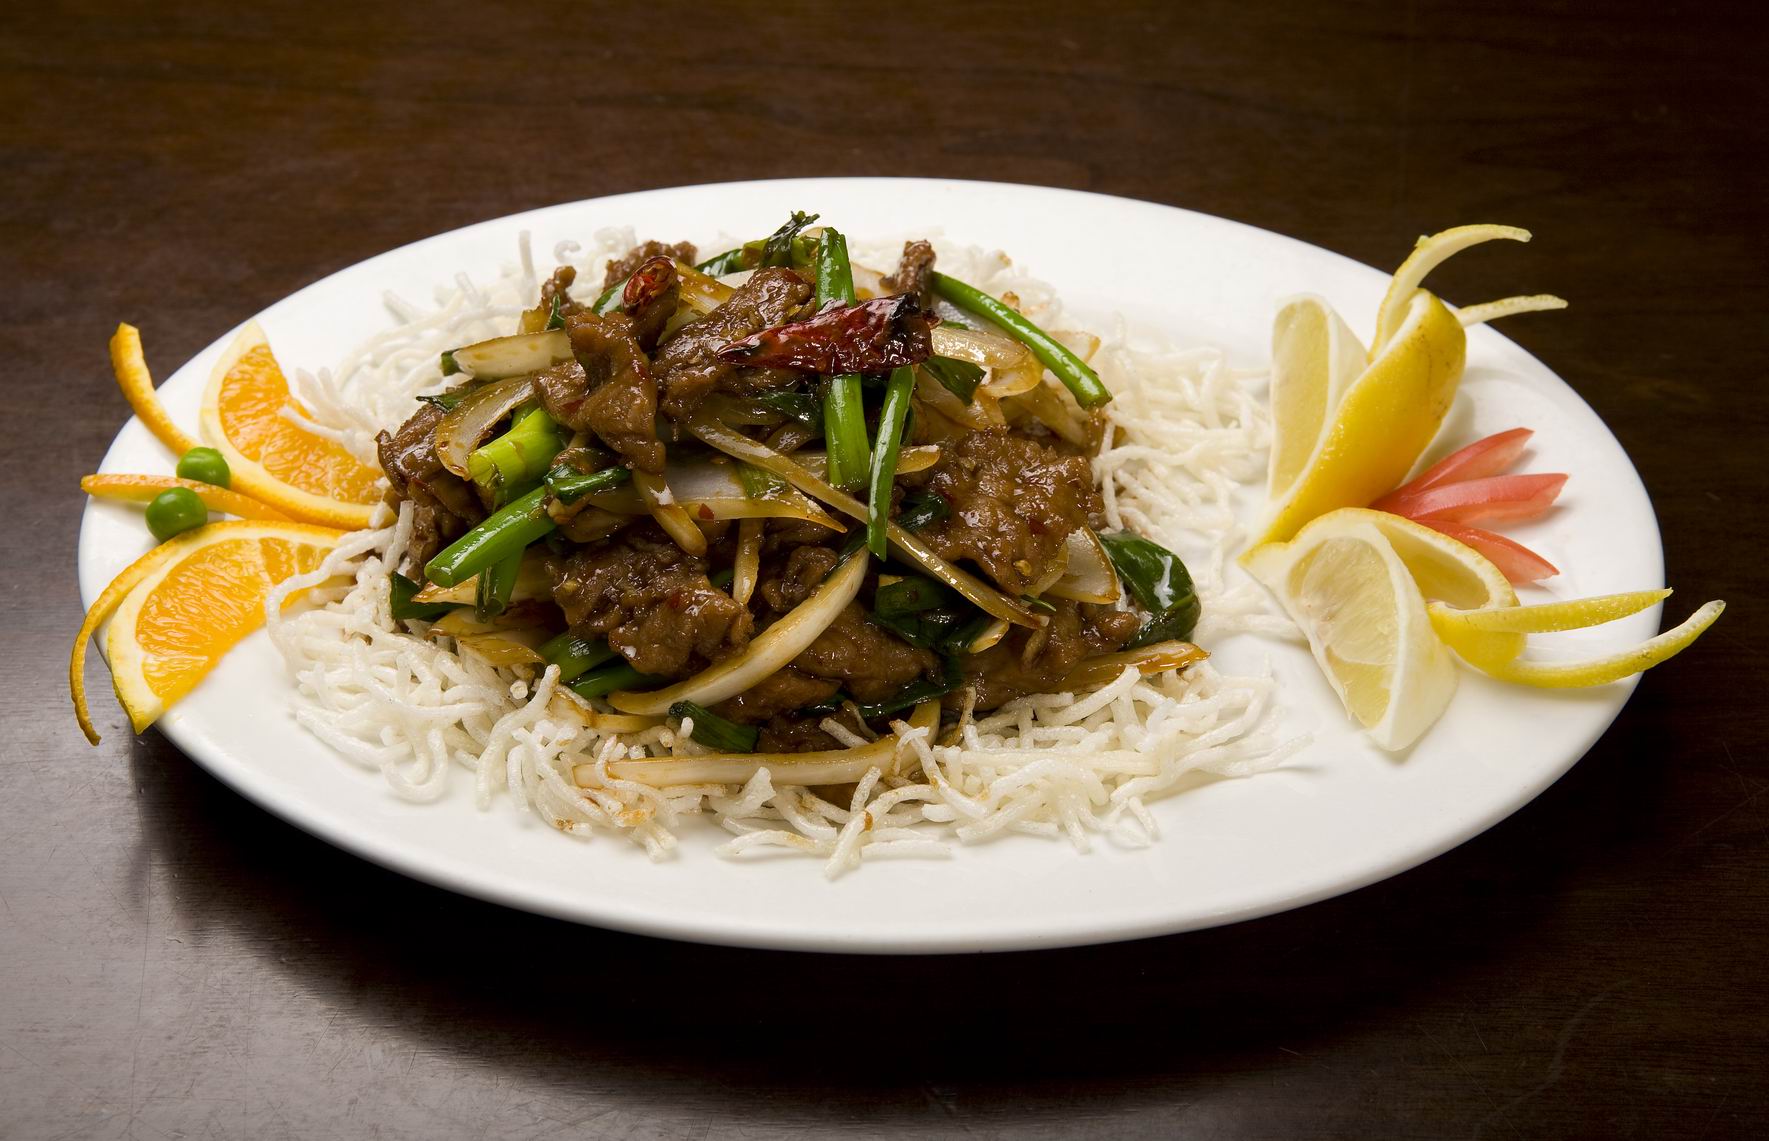 ASIA GOURMET CHINESE FOOD - photos - Online Coupons, Specials